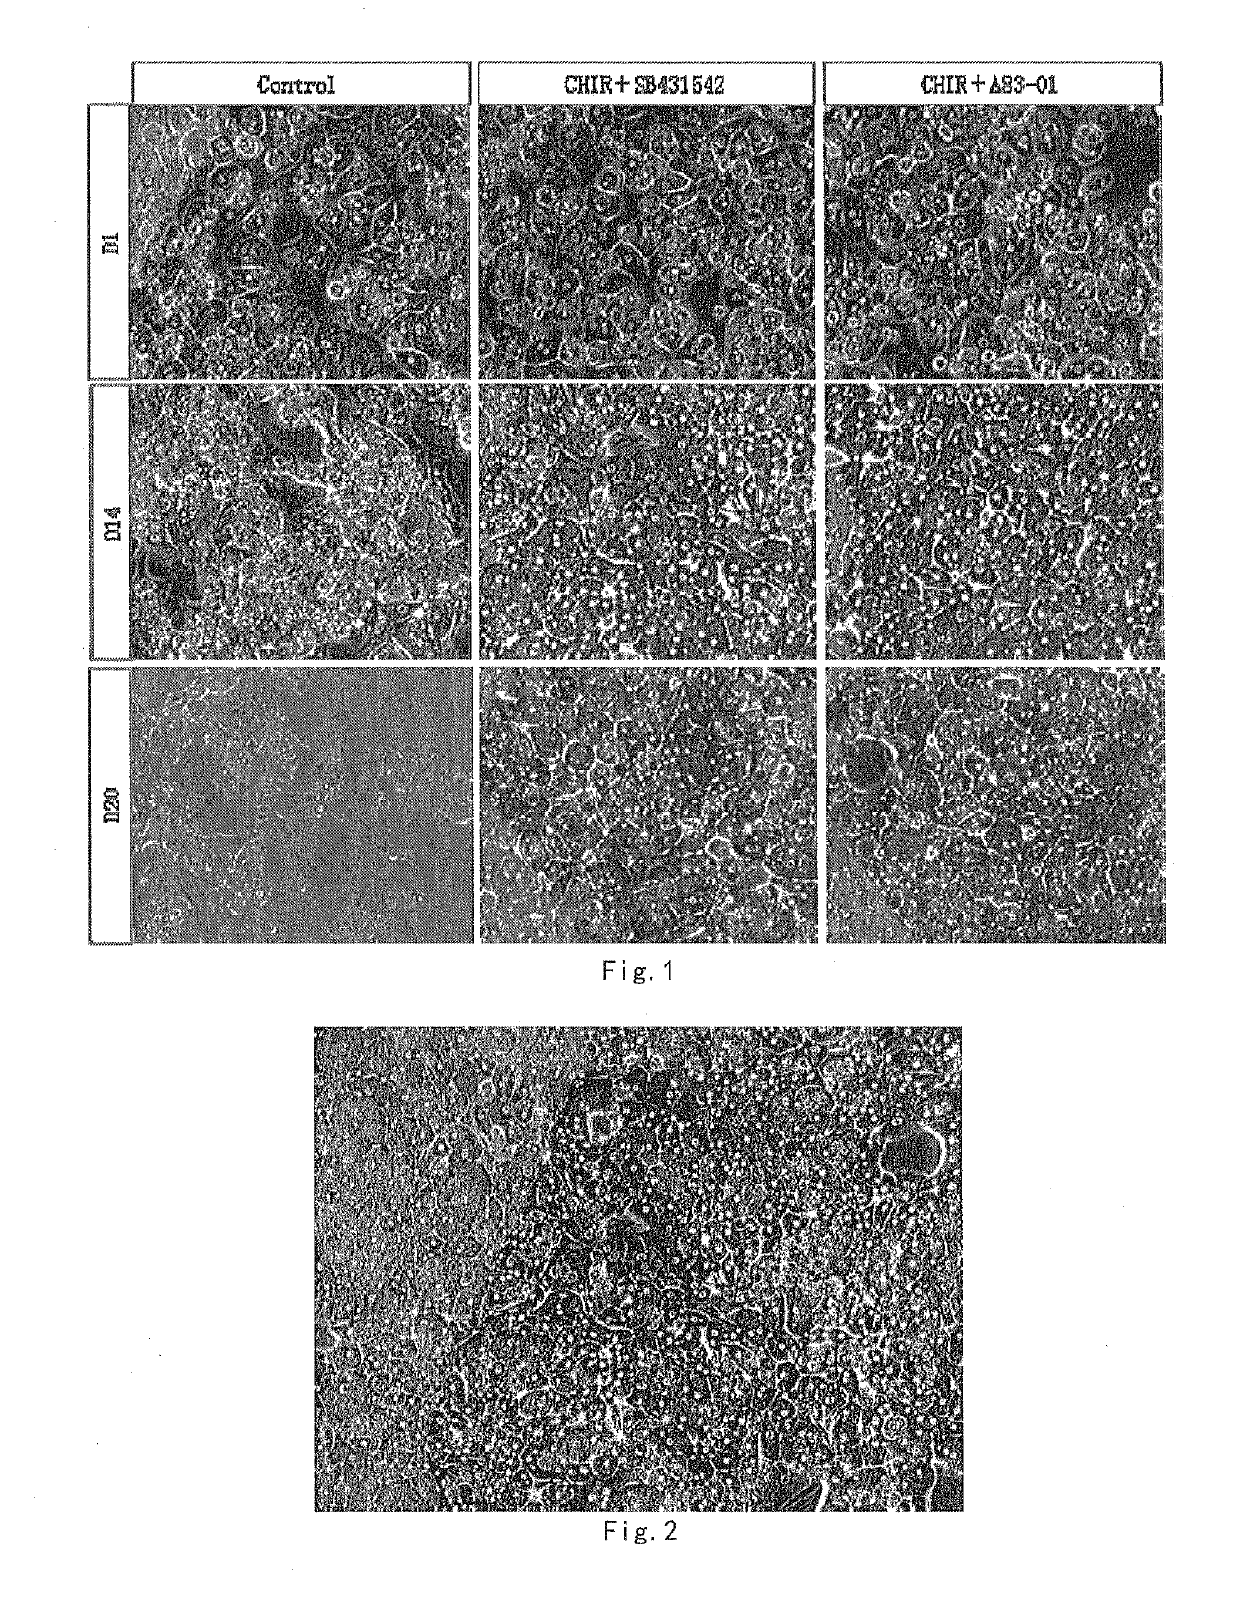 Culture method for long-term maintenance and proliferation subculture of human hepatocytes